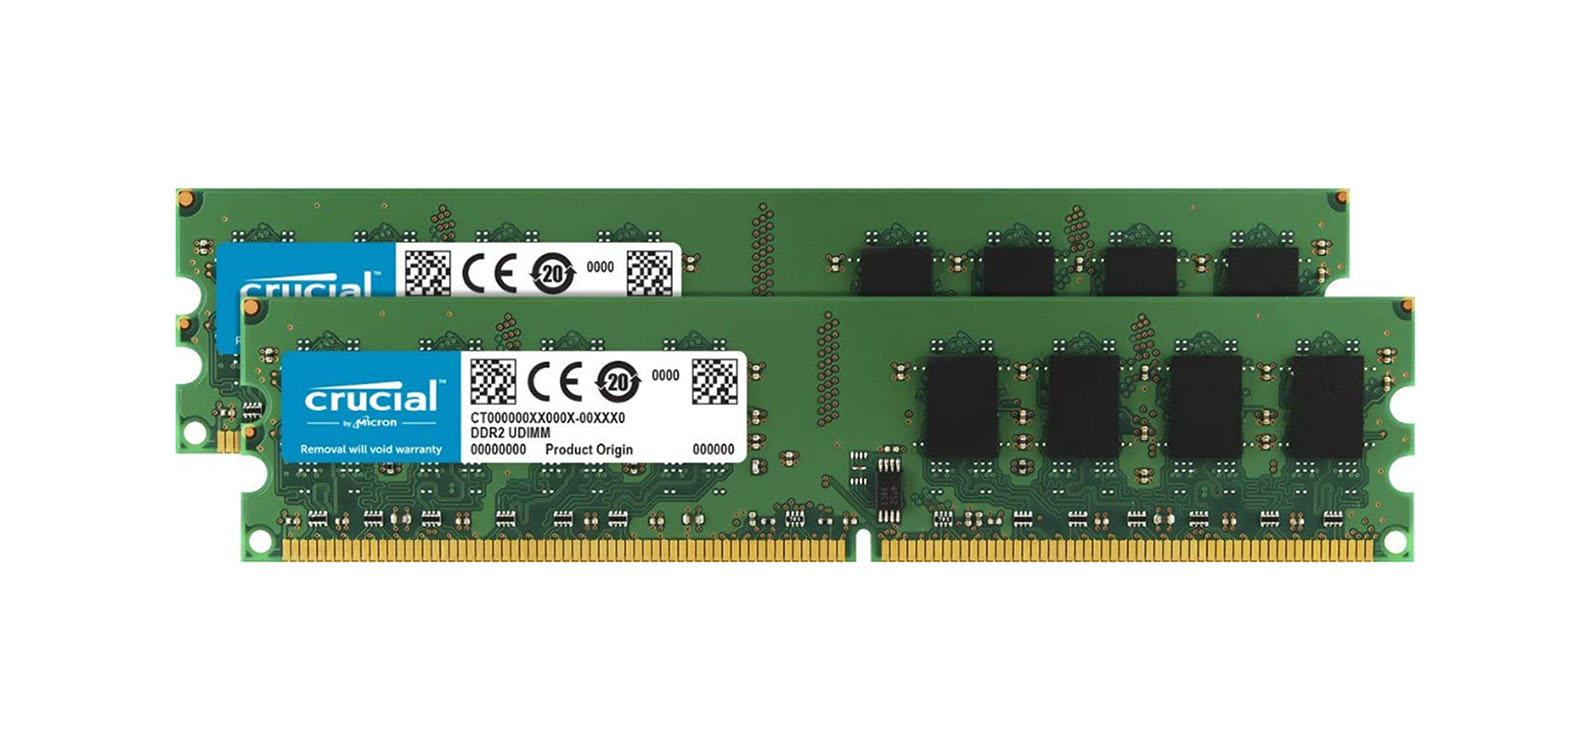 Crucial CT601278 8GB Kit (2 x 4GB) DDR2-667MHz PC2-5300 ECC Fully Buffered CL5 240-Pin DIMM Memory upgrade for Intel S5000VCL